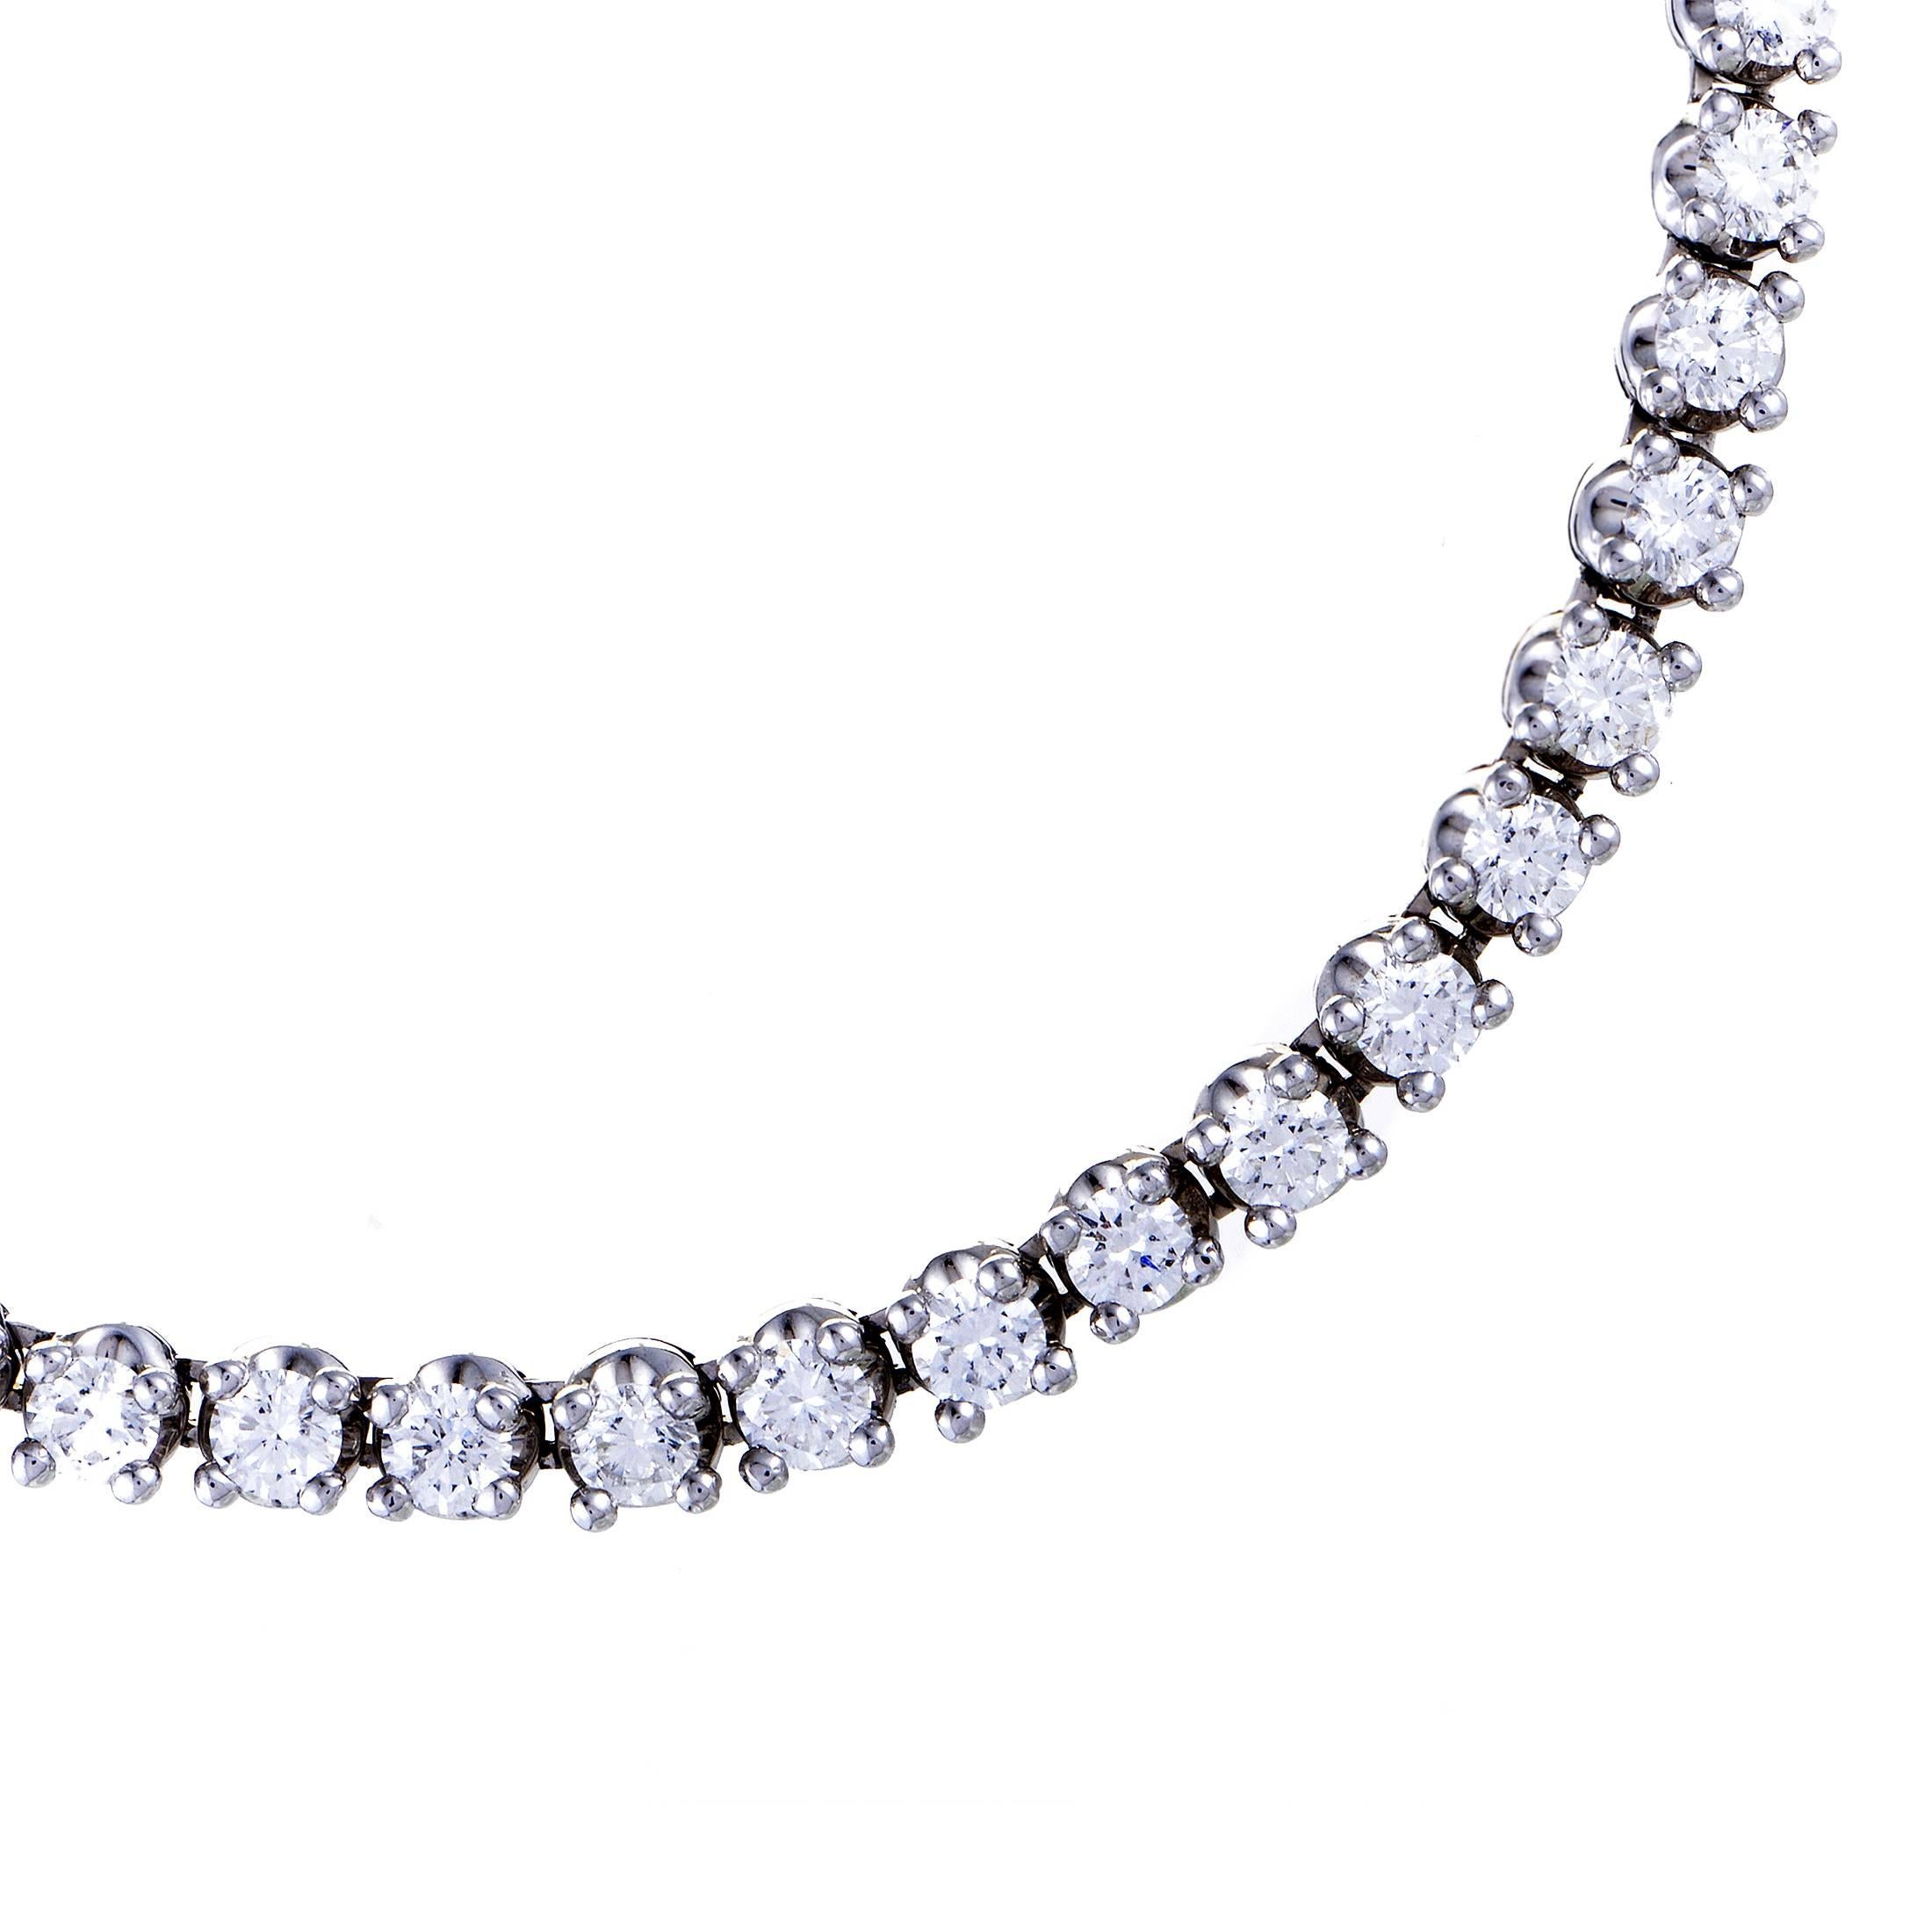 Timeless elegance and everlasting sparkle meet in this stunning tennis necklace from Bulgari which boasts a minimalist shape made of shimmering 18K white gold and adorned with charming diamonds weighing in total 11.00 carats.
Included Items: